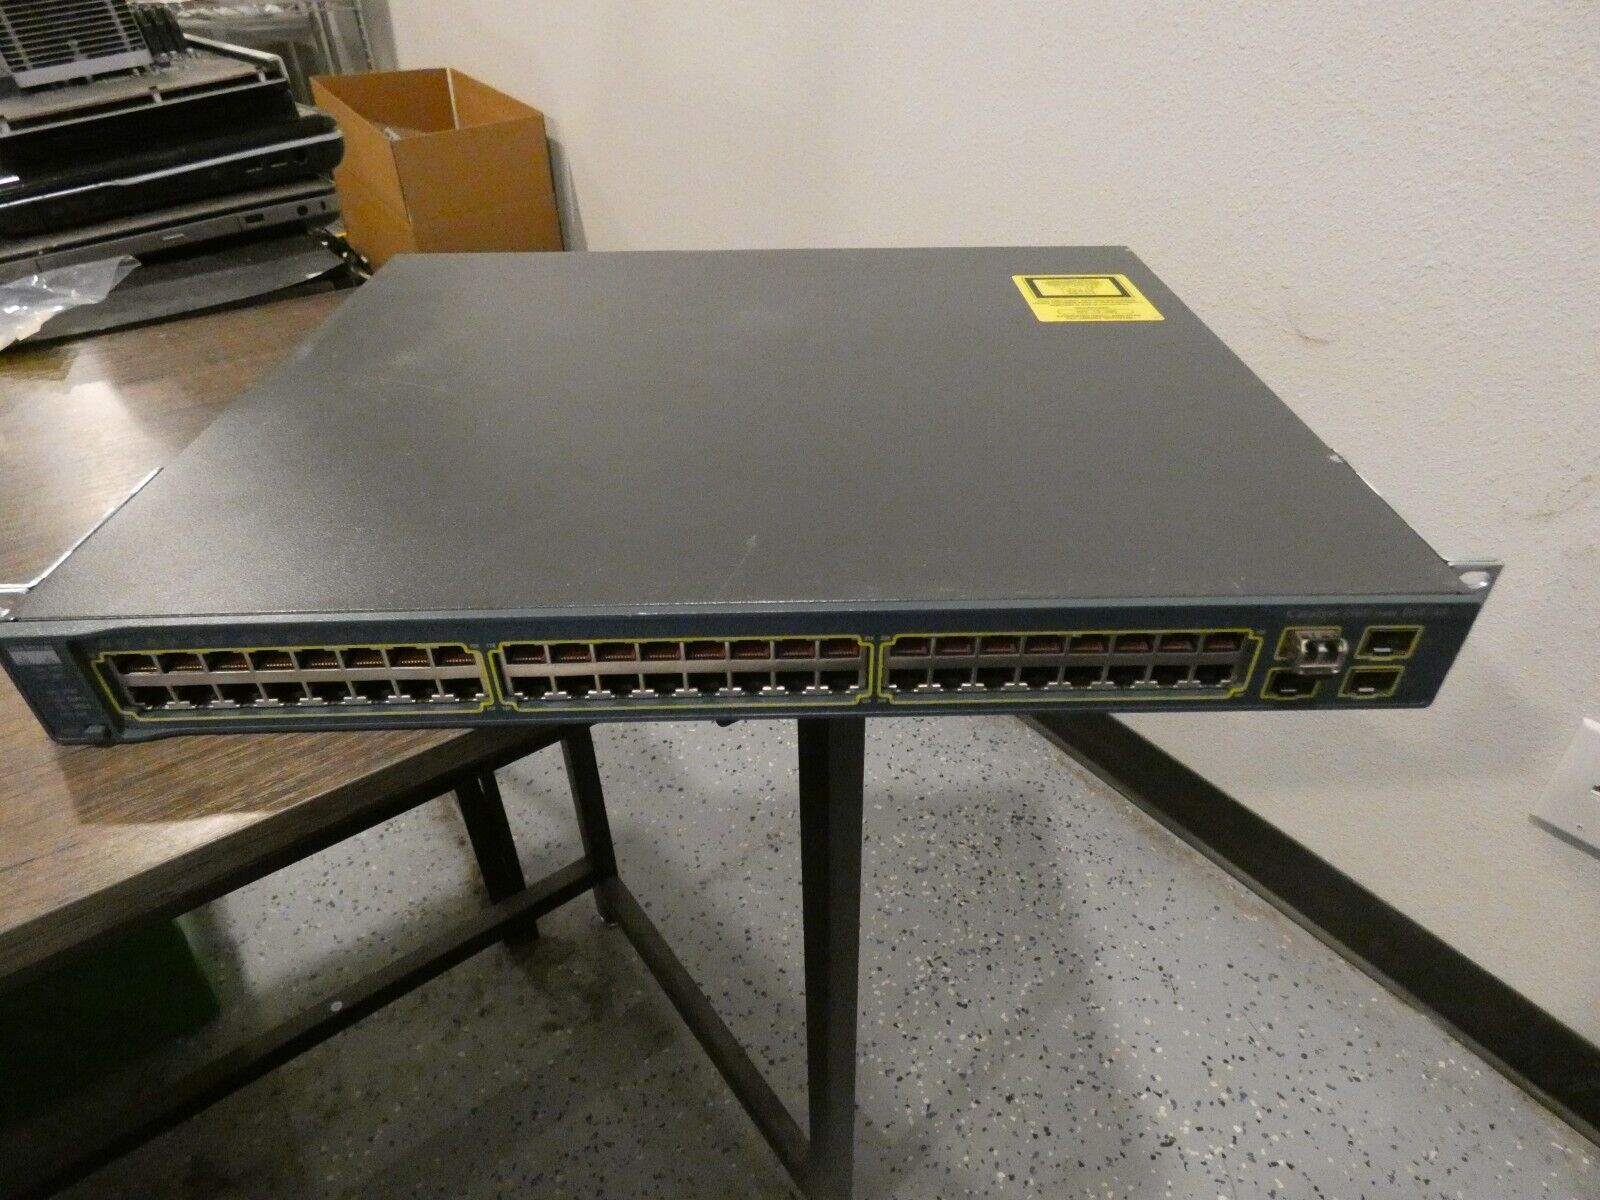 Cisco Catalyst 3560 (WS-C3560-48PS-S) 48 Port Ethernet Switch